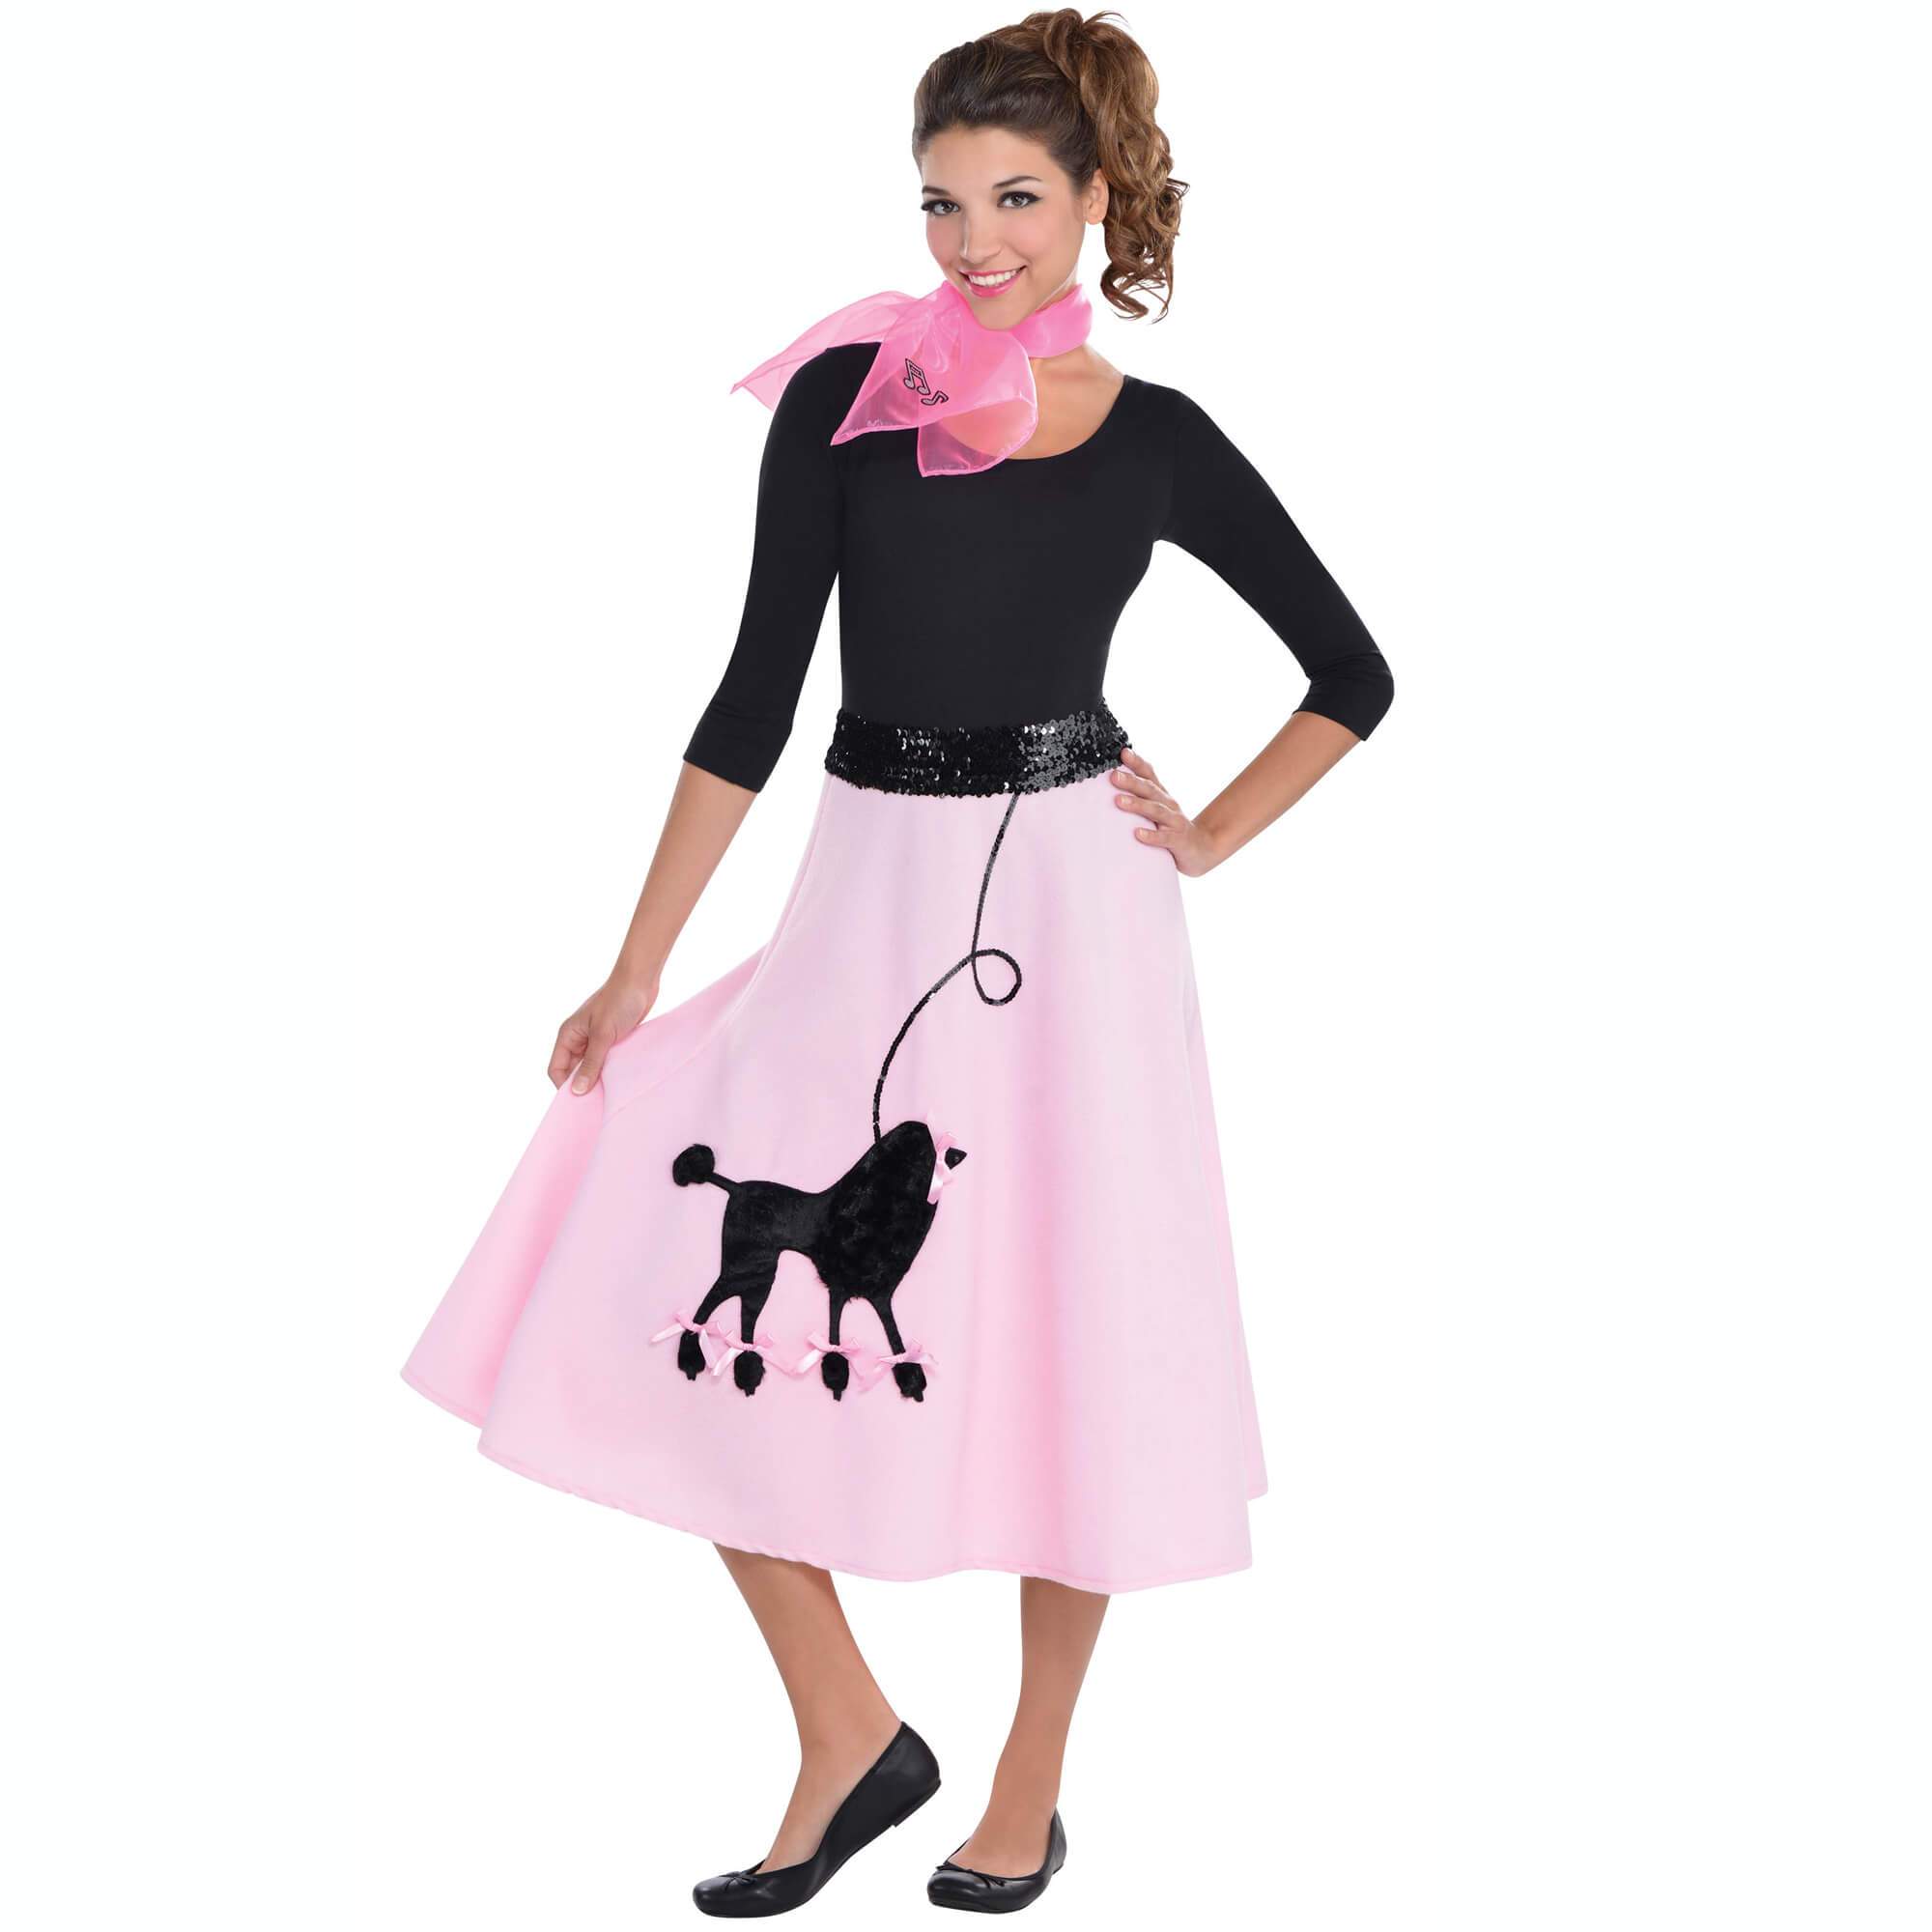 Adult Poodle Skirt 1950s Costume Costumes & Apparel - Party Centre